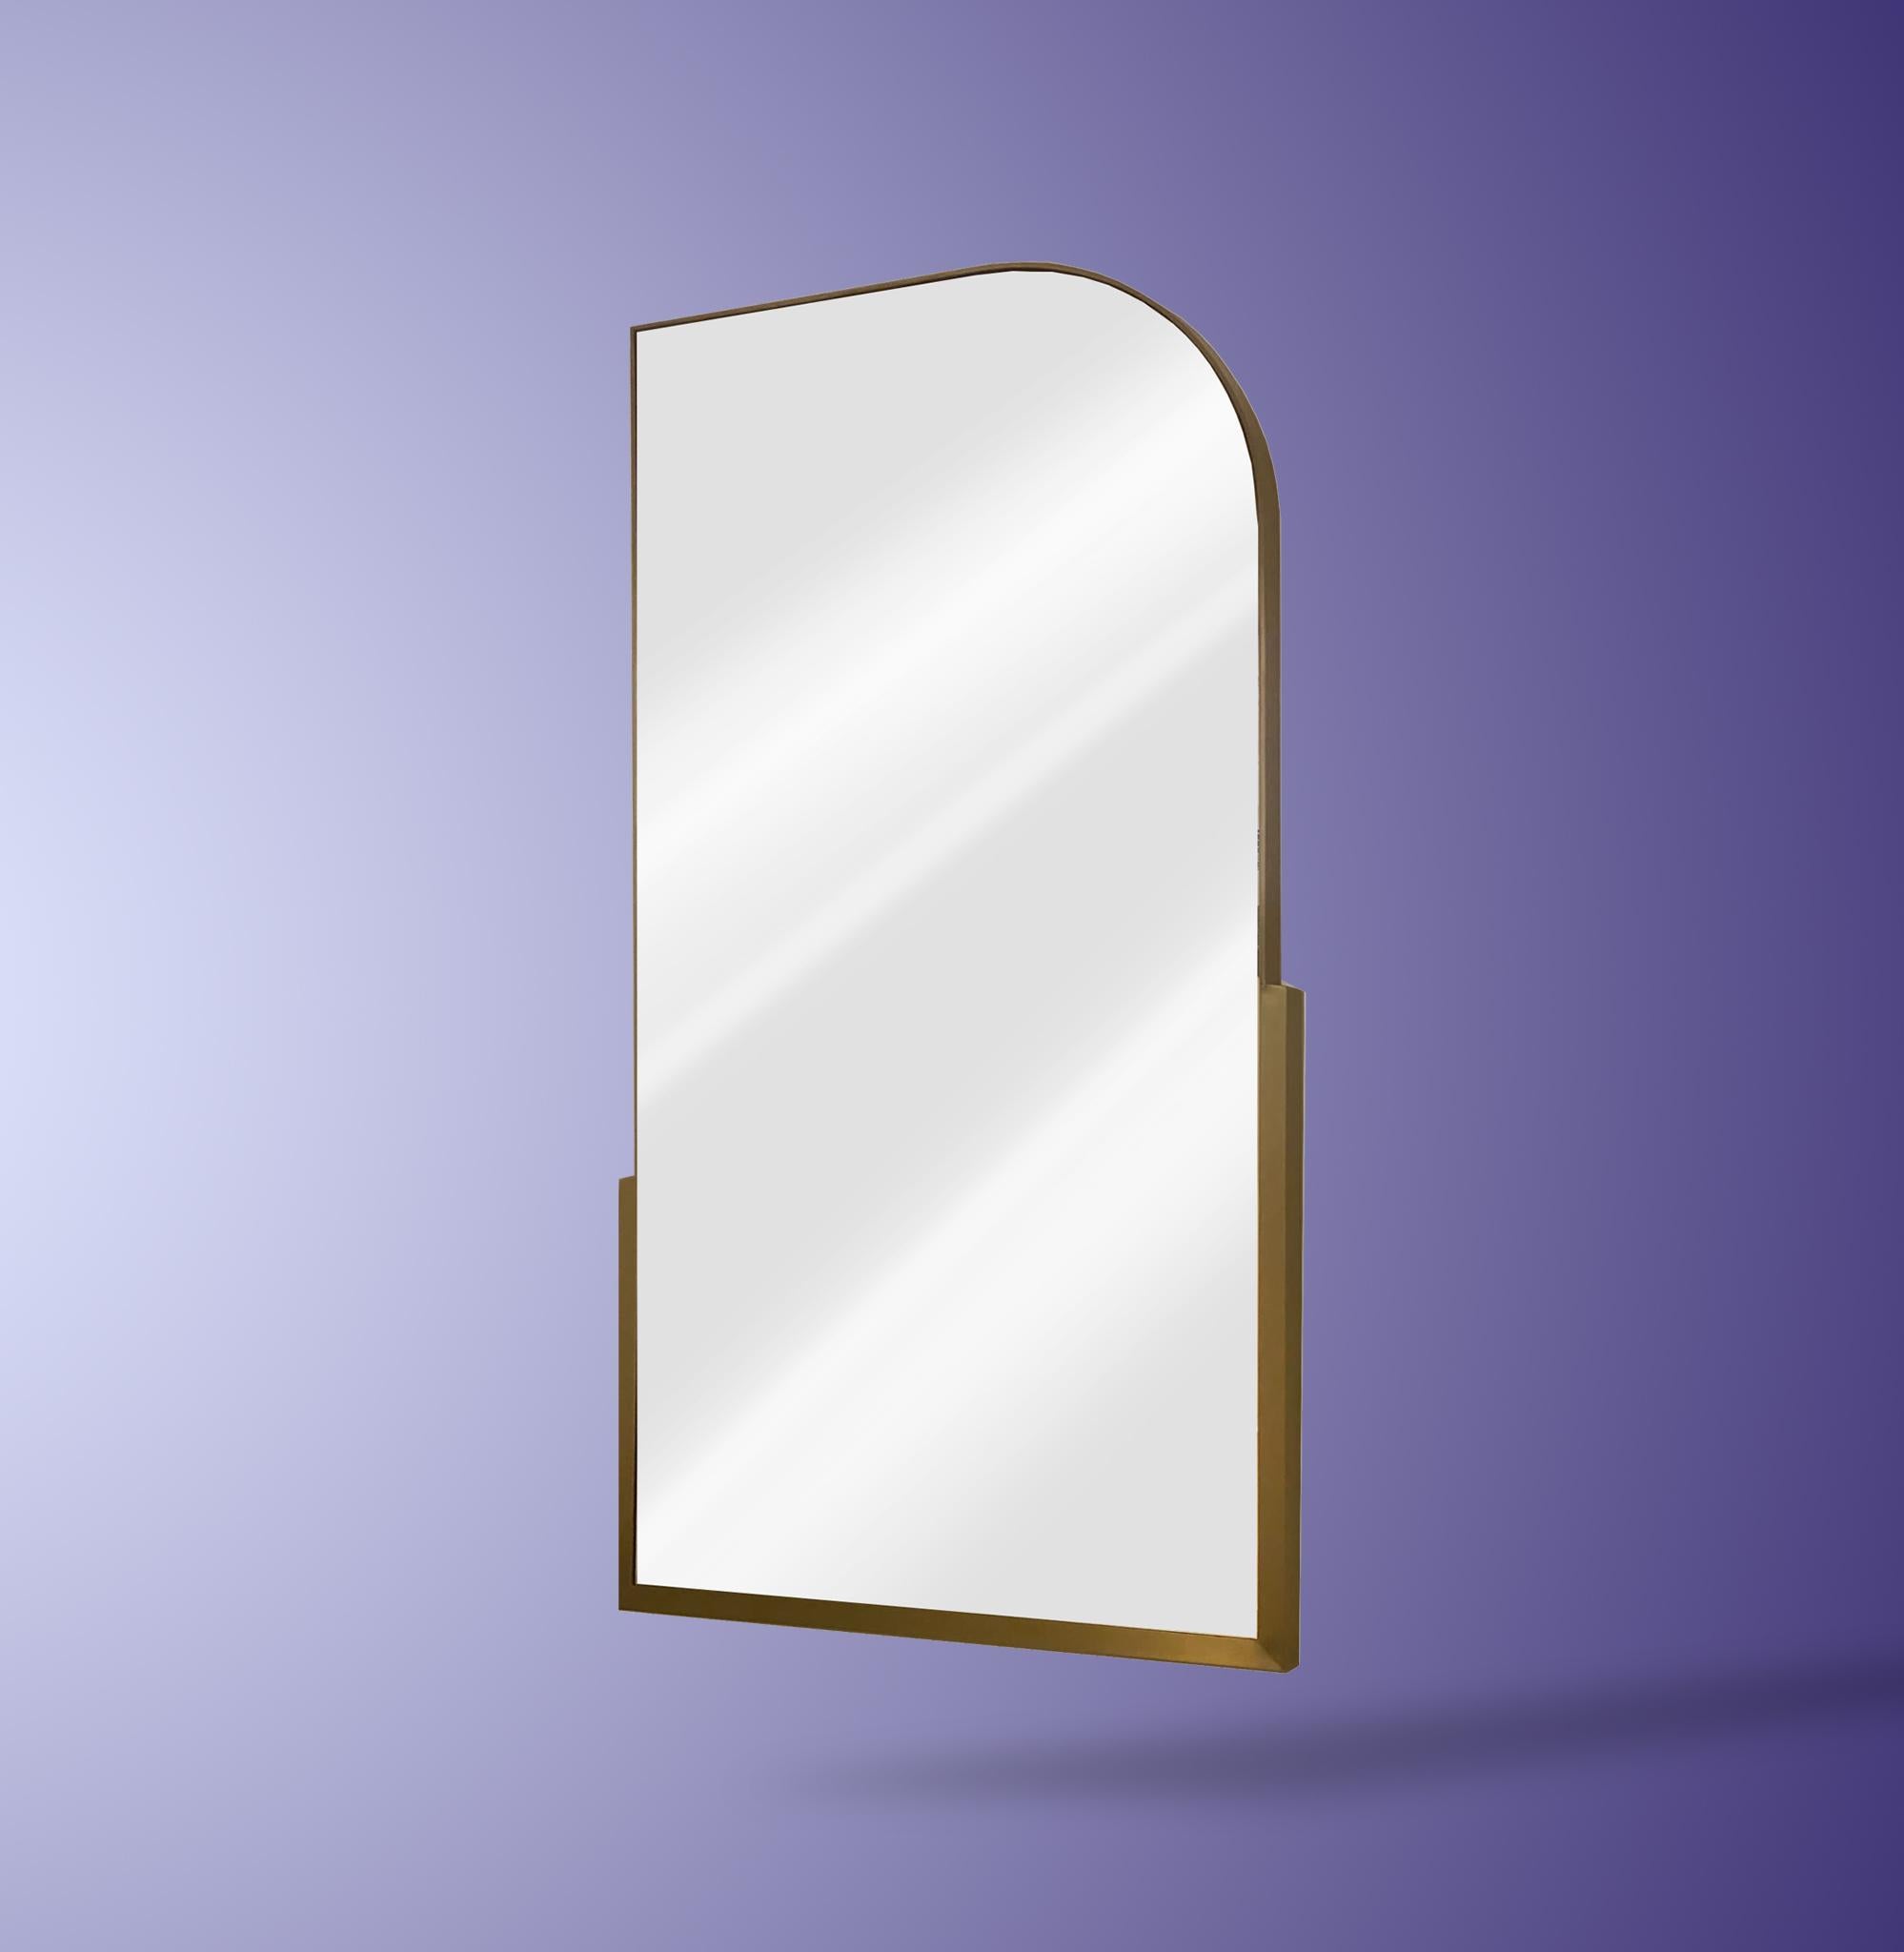 This mirror is made in brass frame with a double thickness. 
Can be left on floor leaning on a wall or hung to the wall with a french cleat.

As with all our mirrors, this mirror is made to order and is therefore highly customisable, including in